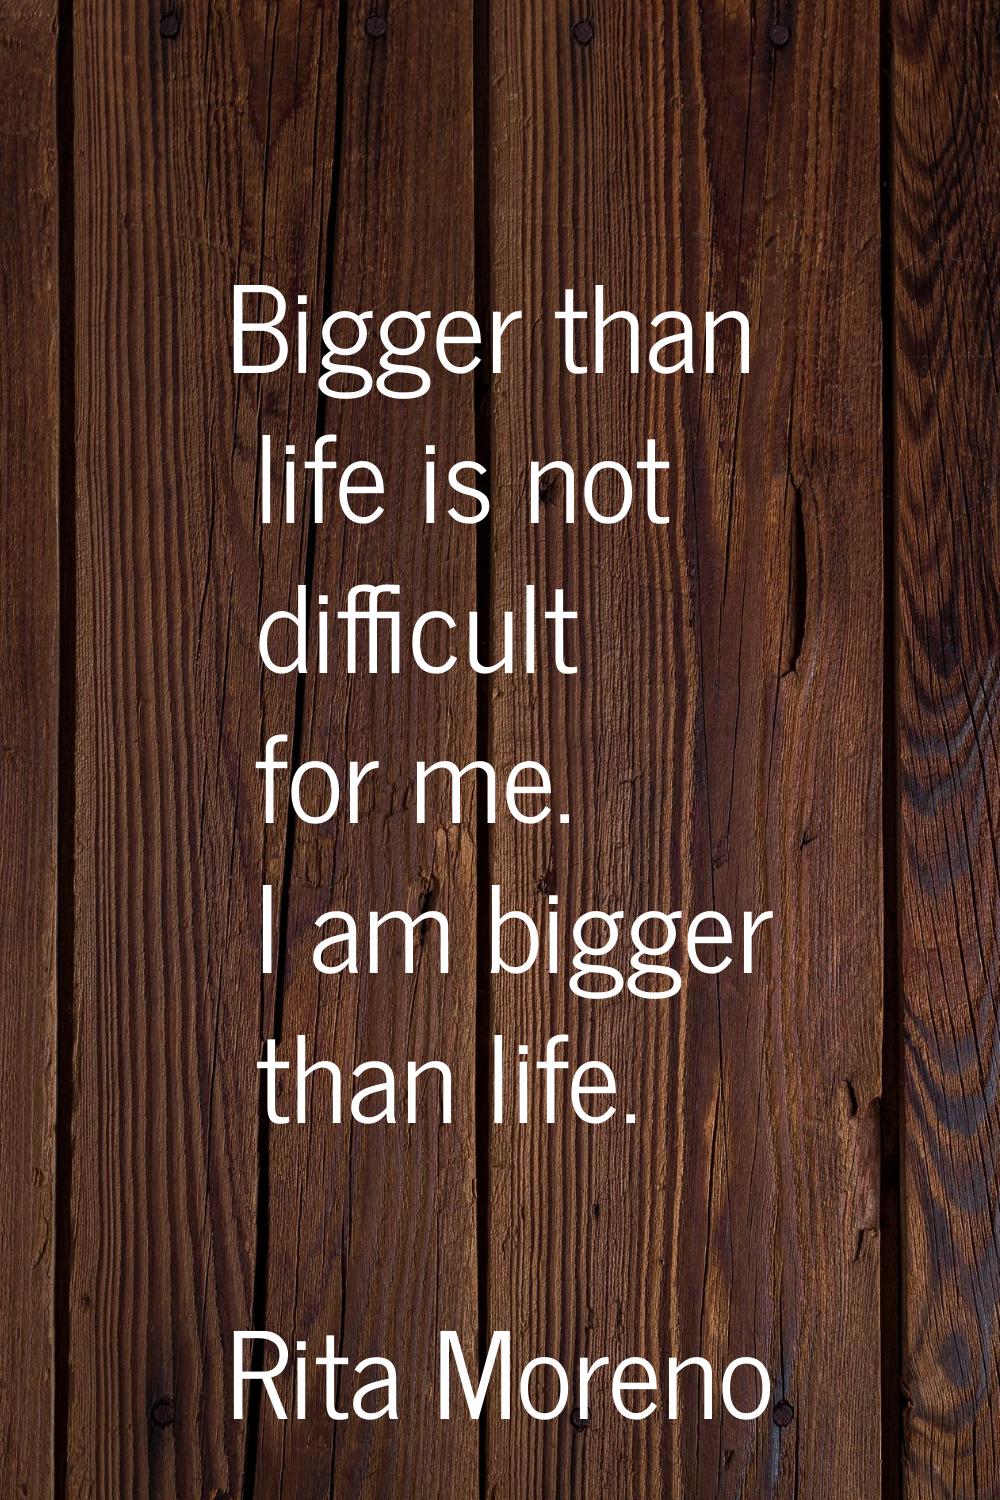 Bigger than life is not difficult for me. I am bigger than life.